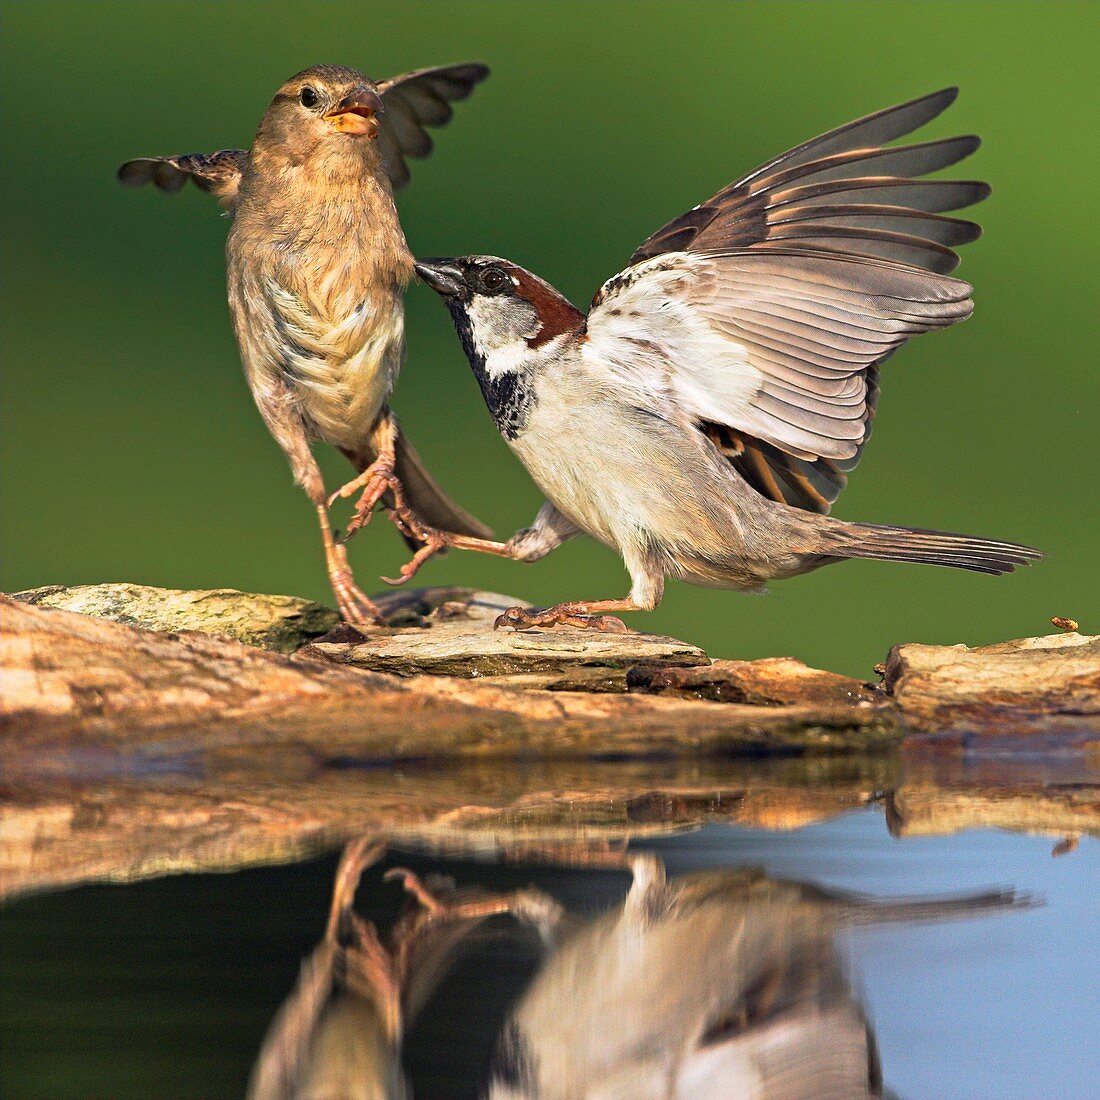 Sparrows fighting